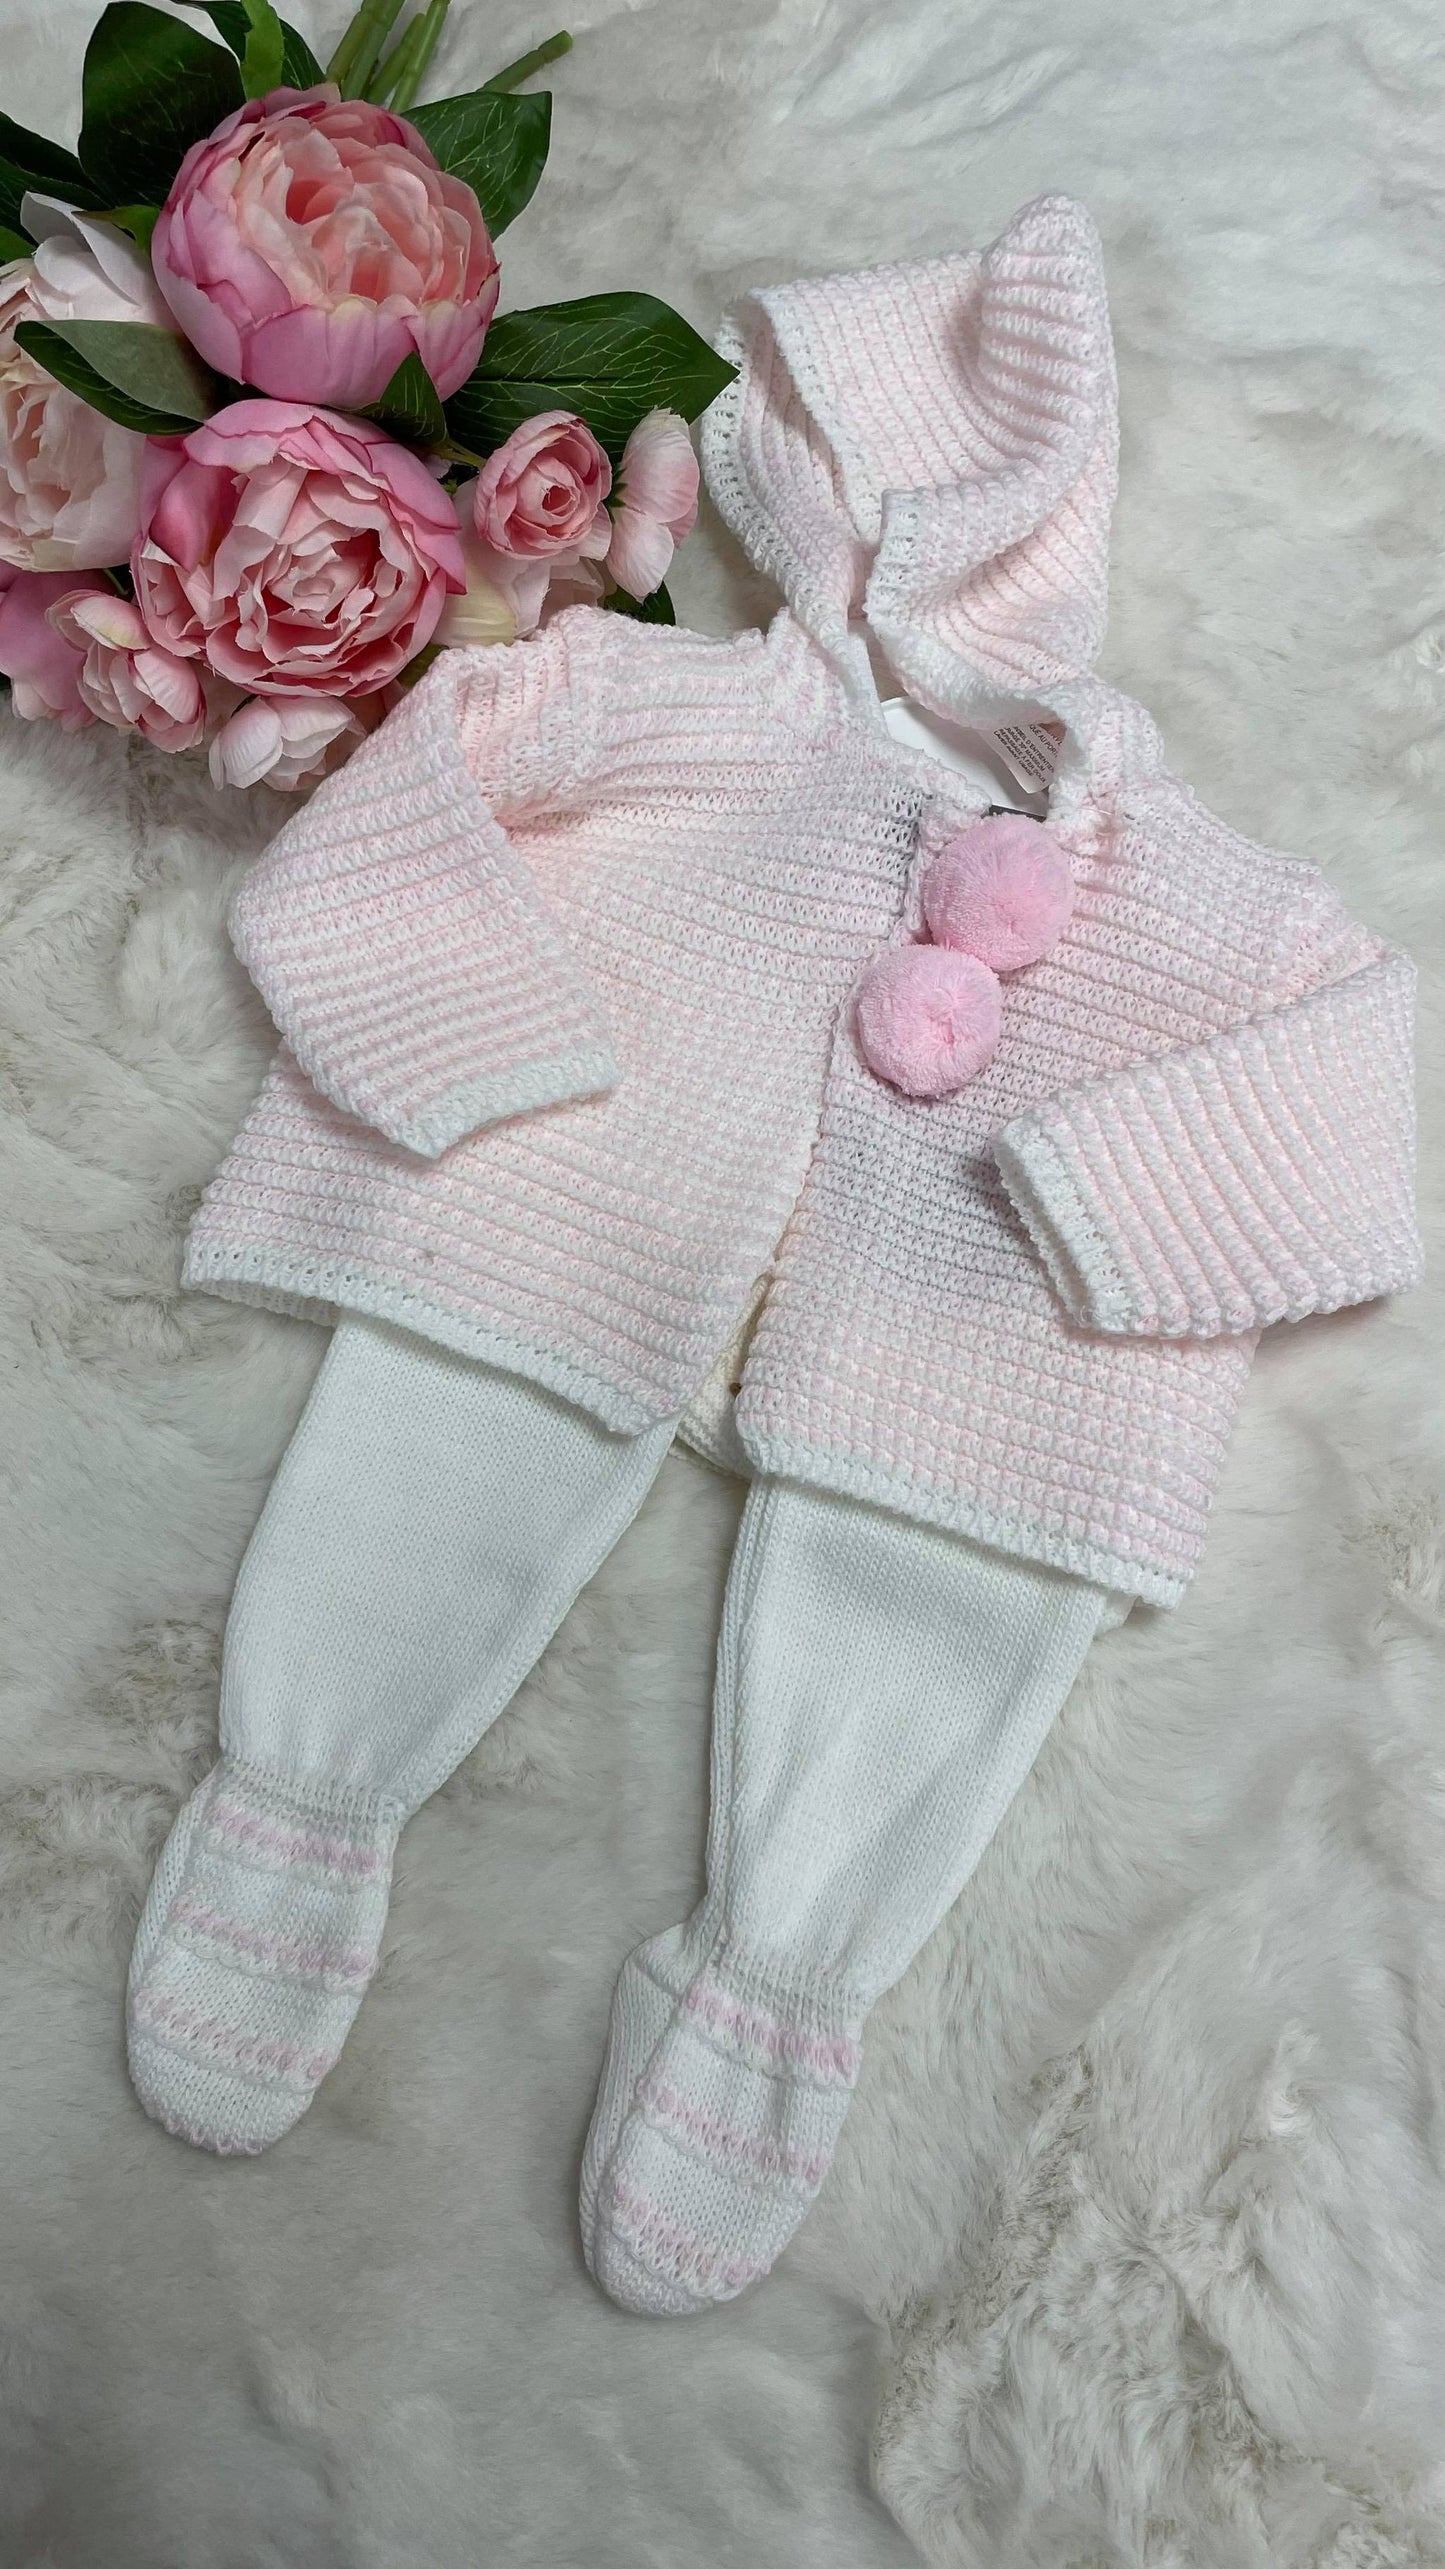 Patterned Knitted Pram Suit